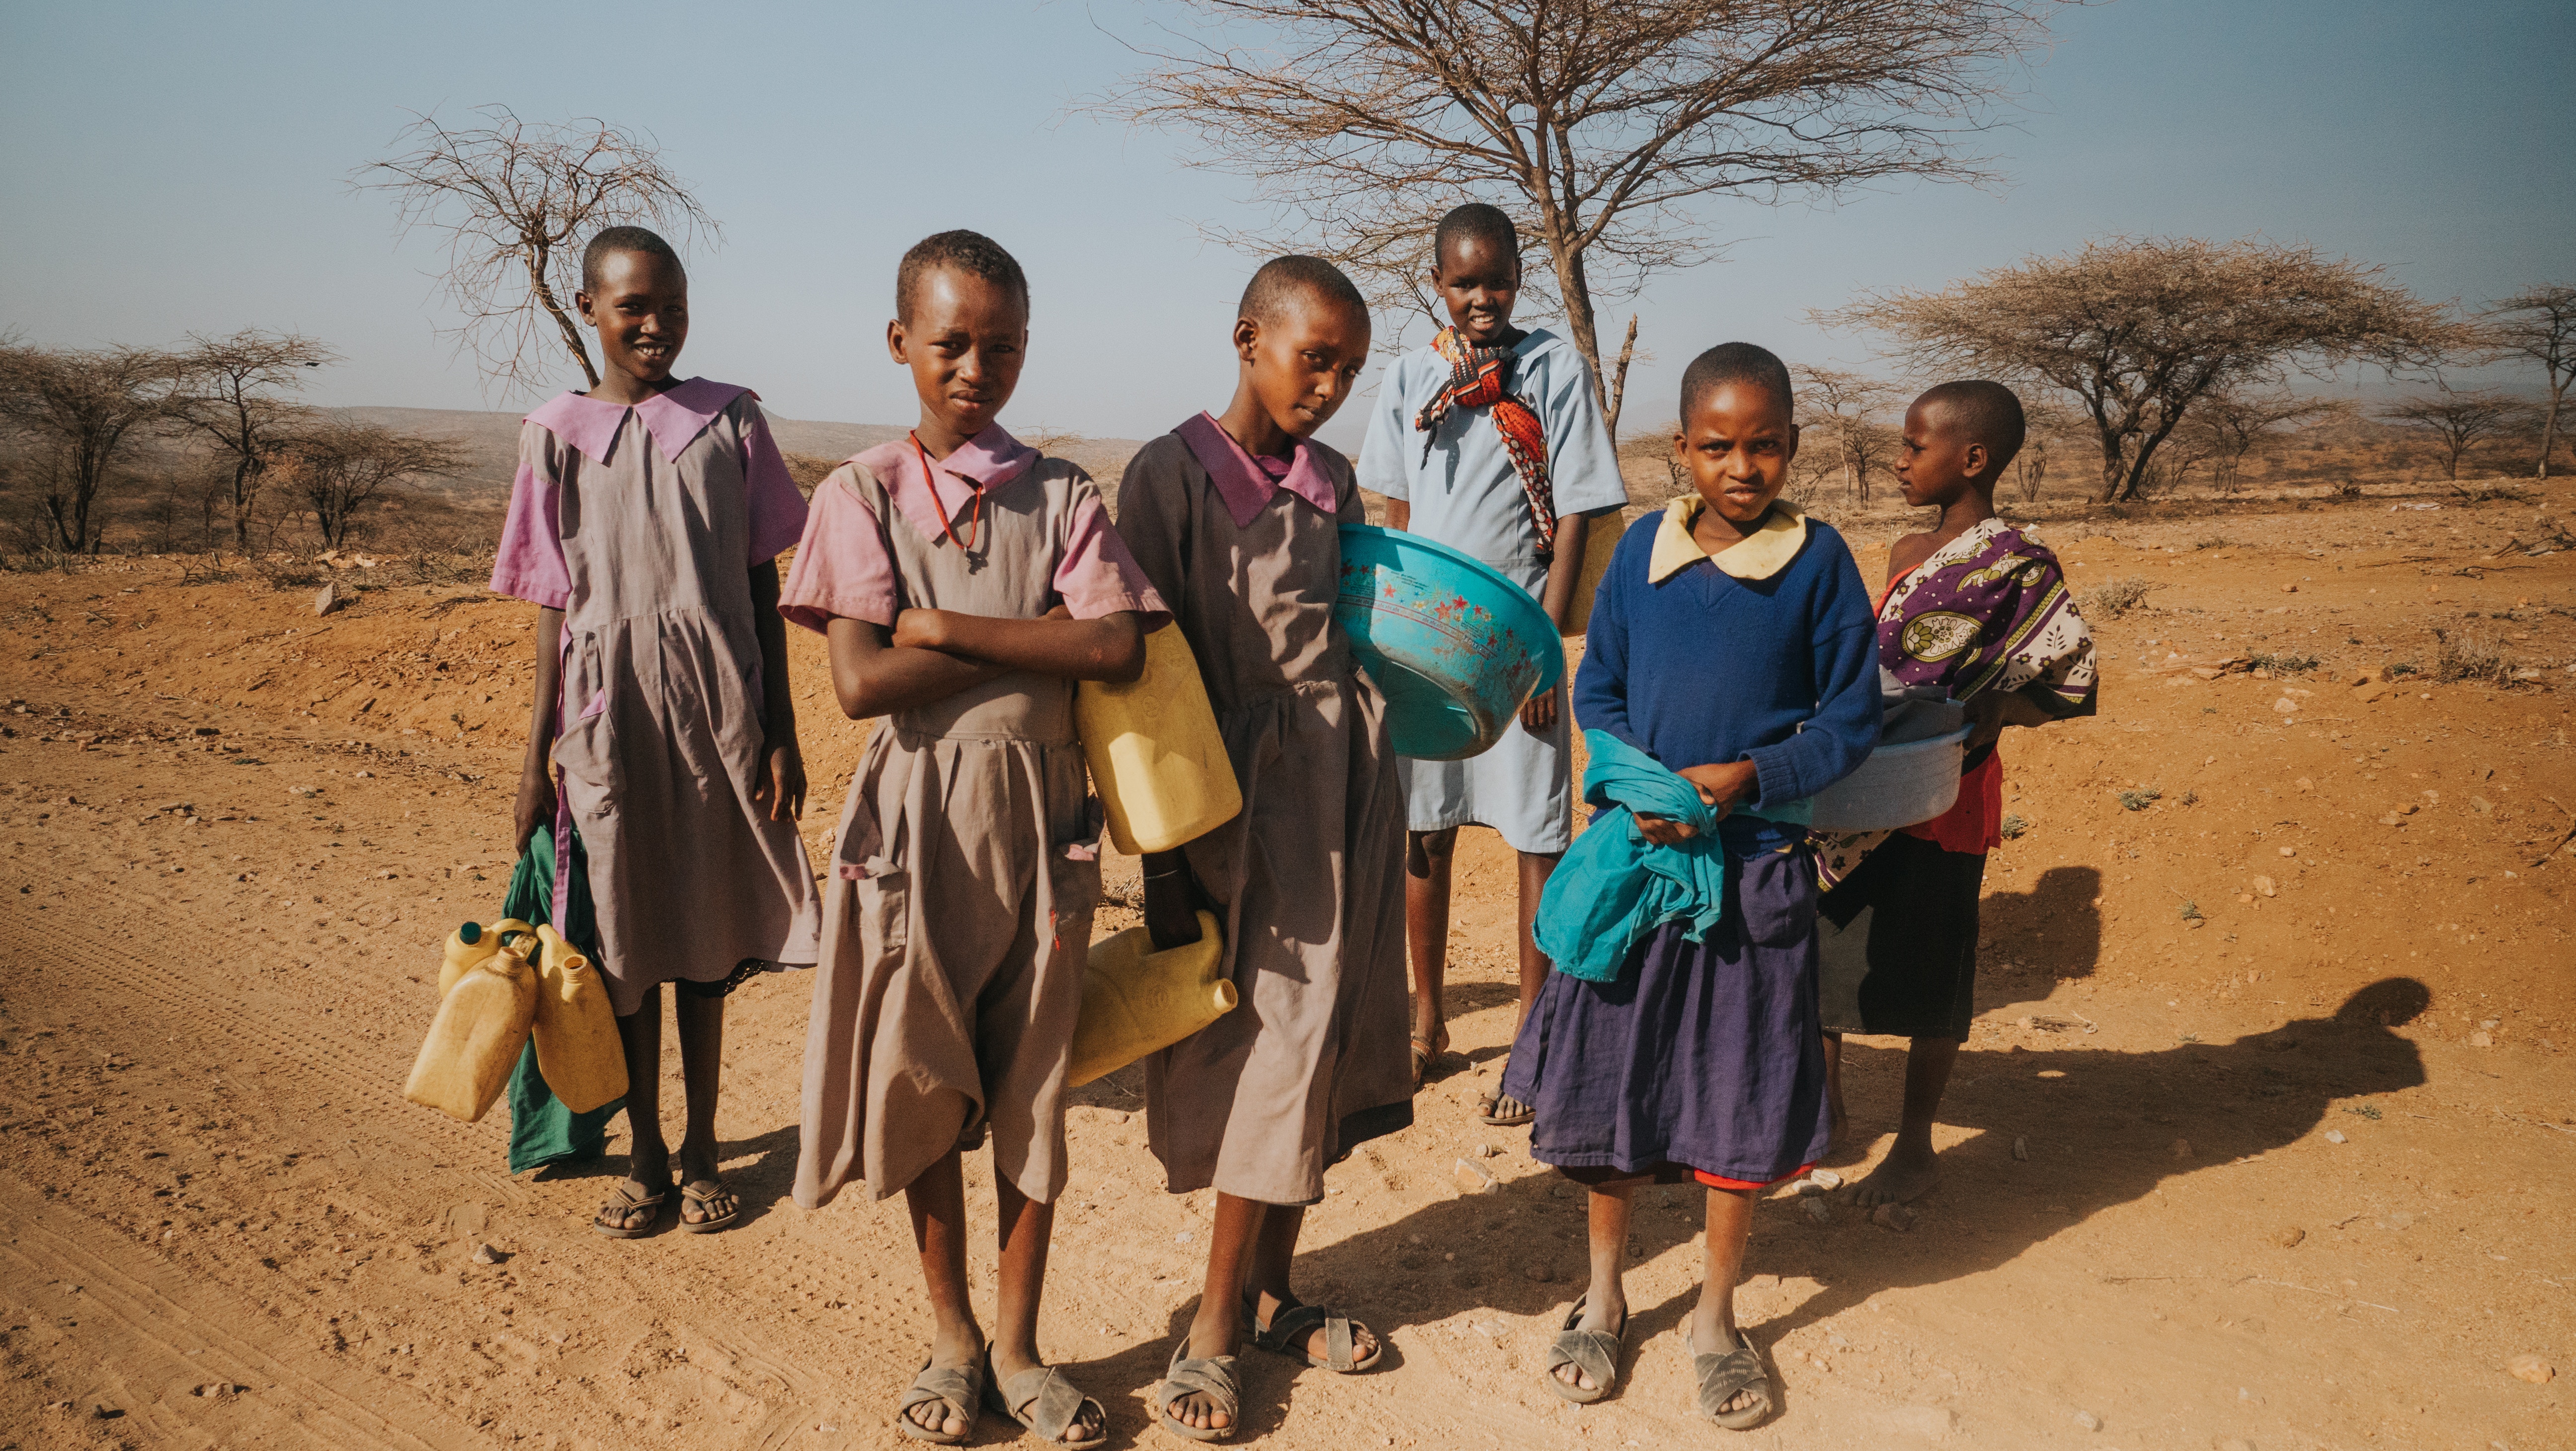 Sware, Kenya Found myself massively impacted by these people in a remote region of northern Kenya. Life is hard, water is a few kilometres away in a dried up river bed and these girls walk there and back a few times a day.